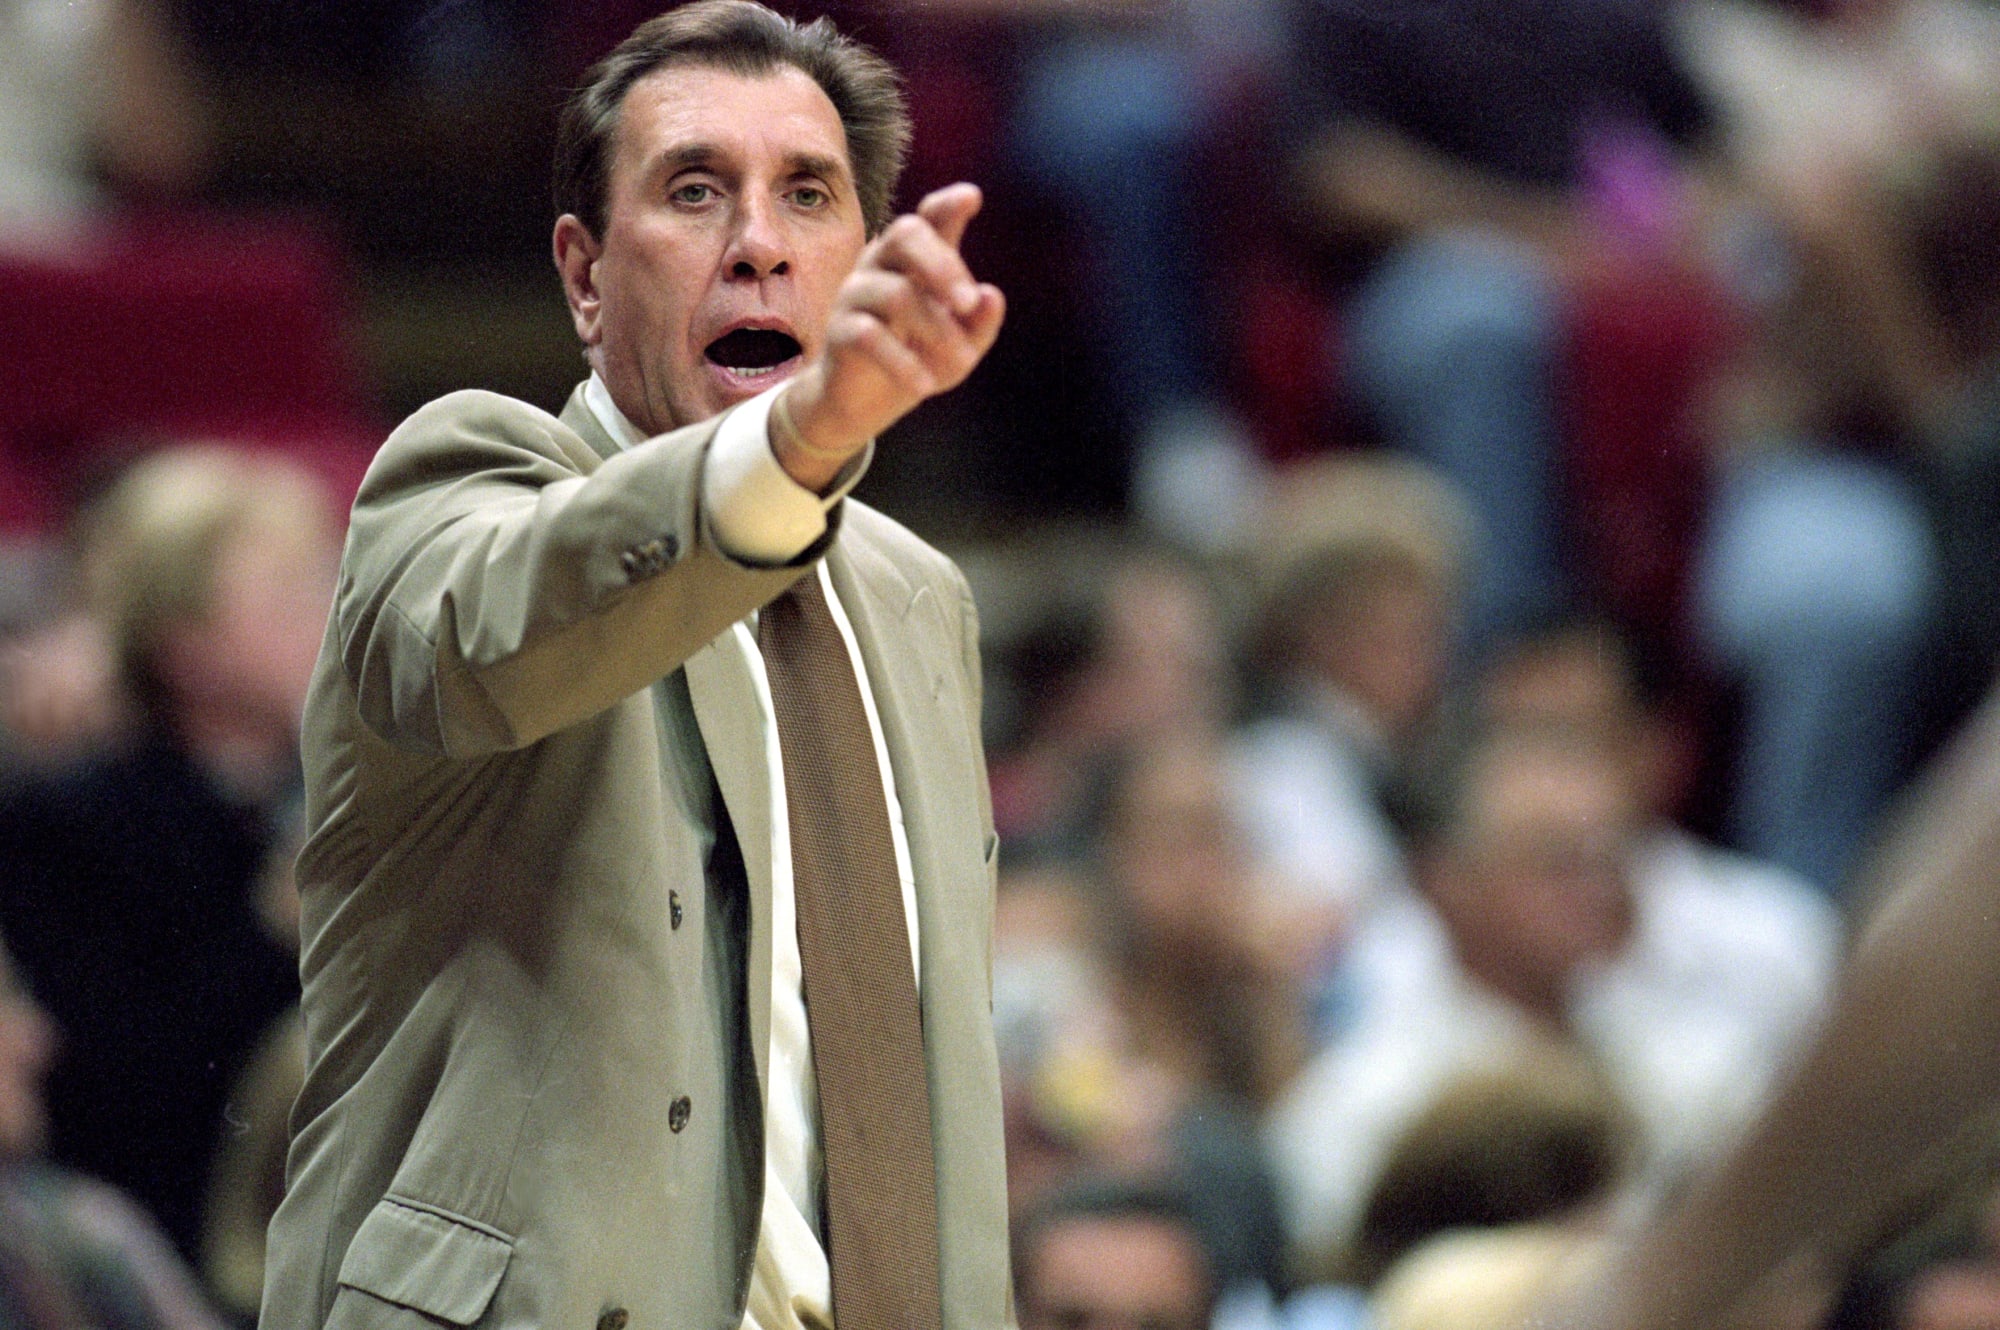 How Rudy Tomjanovich almost didn't become the Rockets' coach